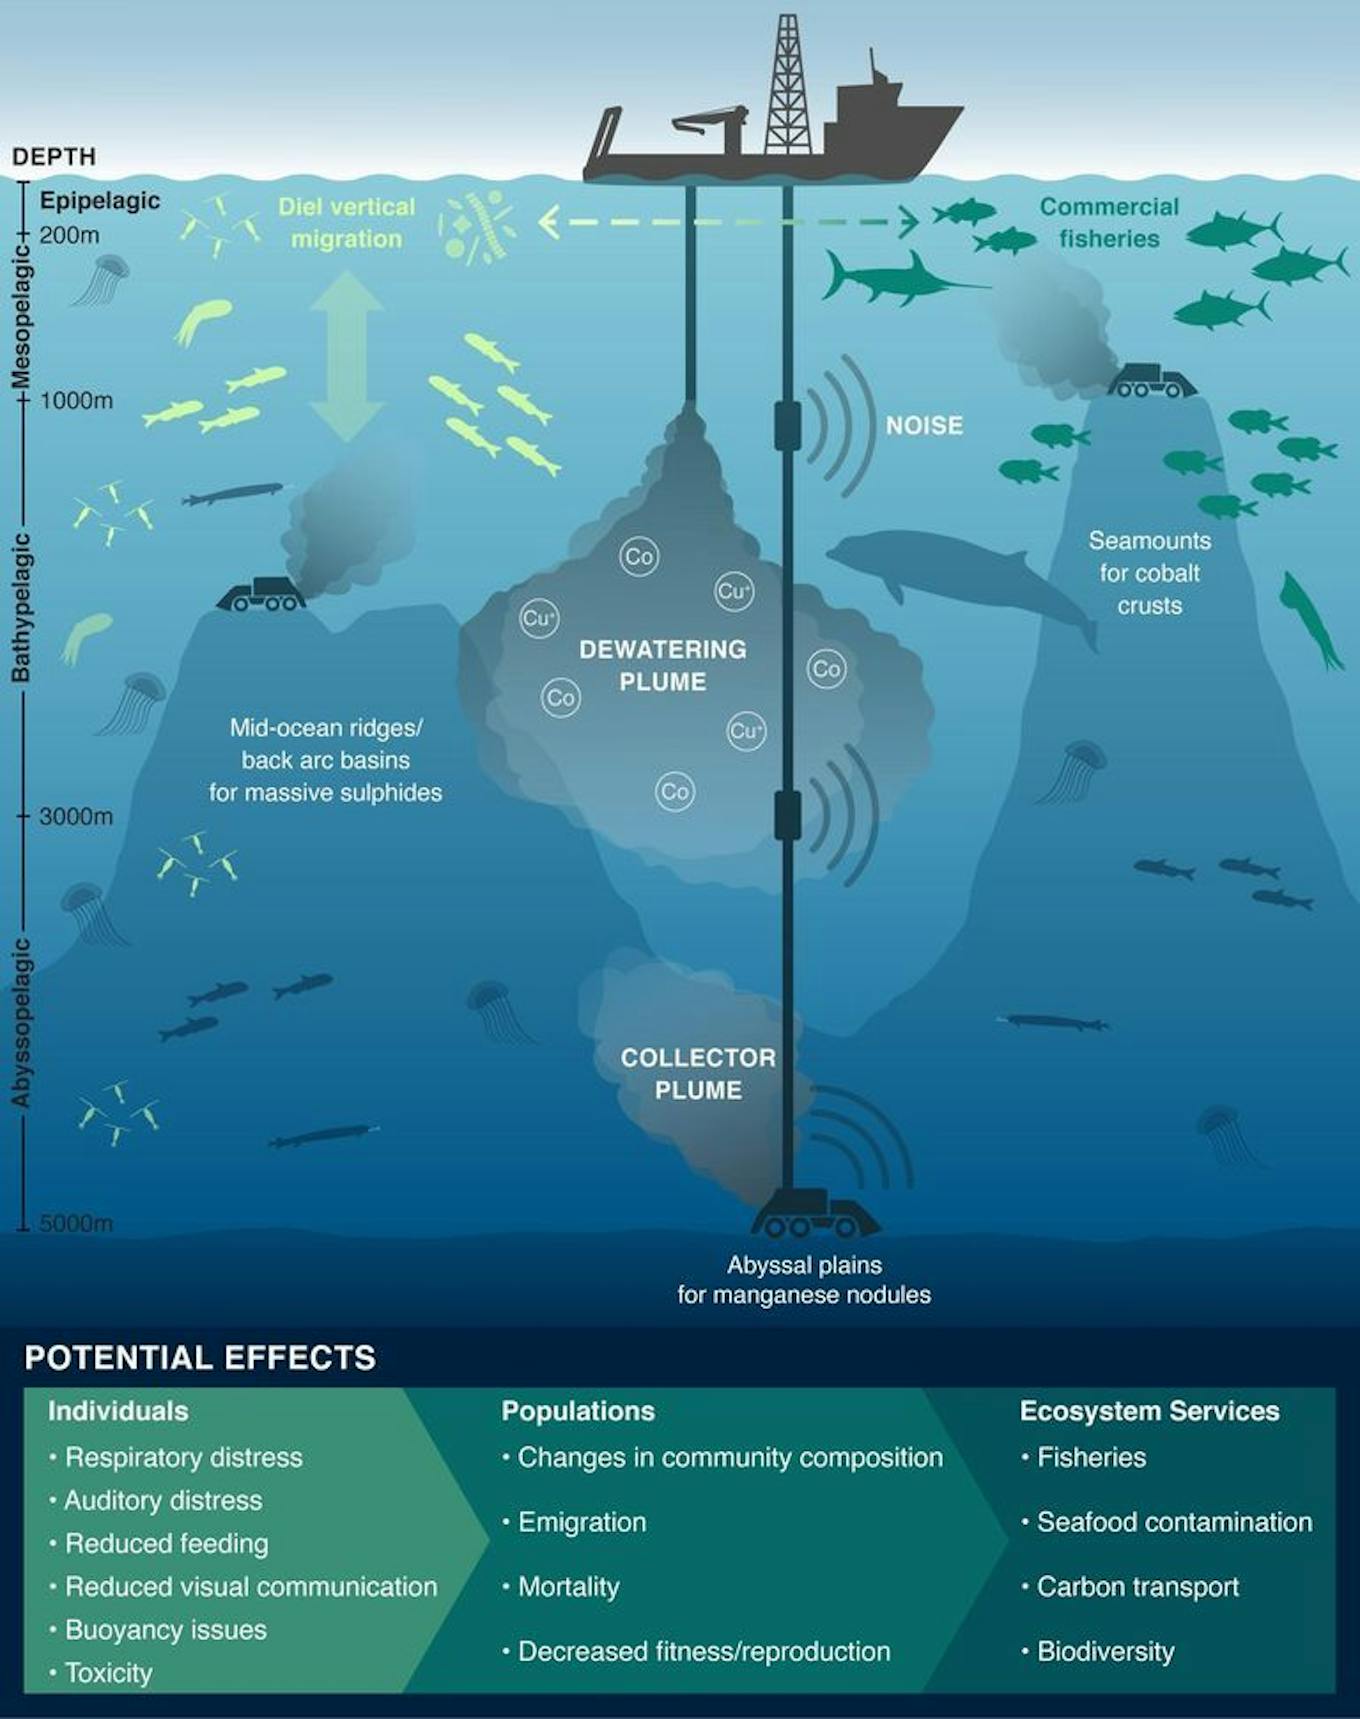 The impacts of deep-sea mining sediment plumes